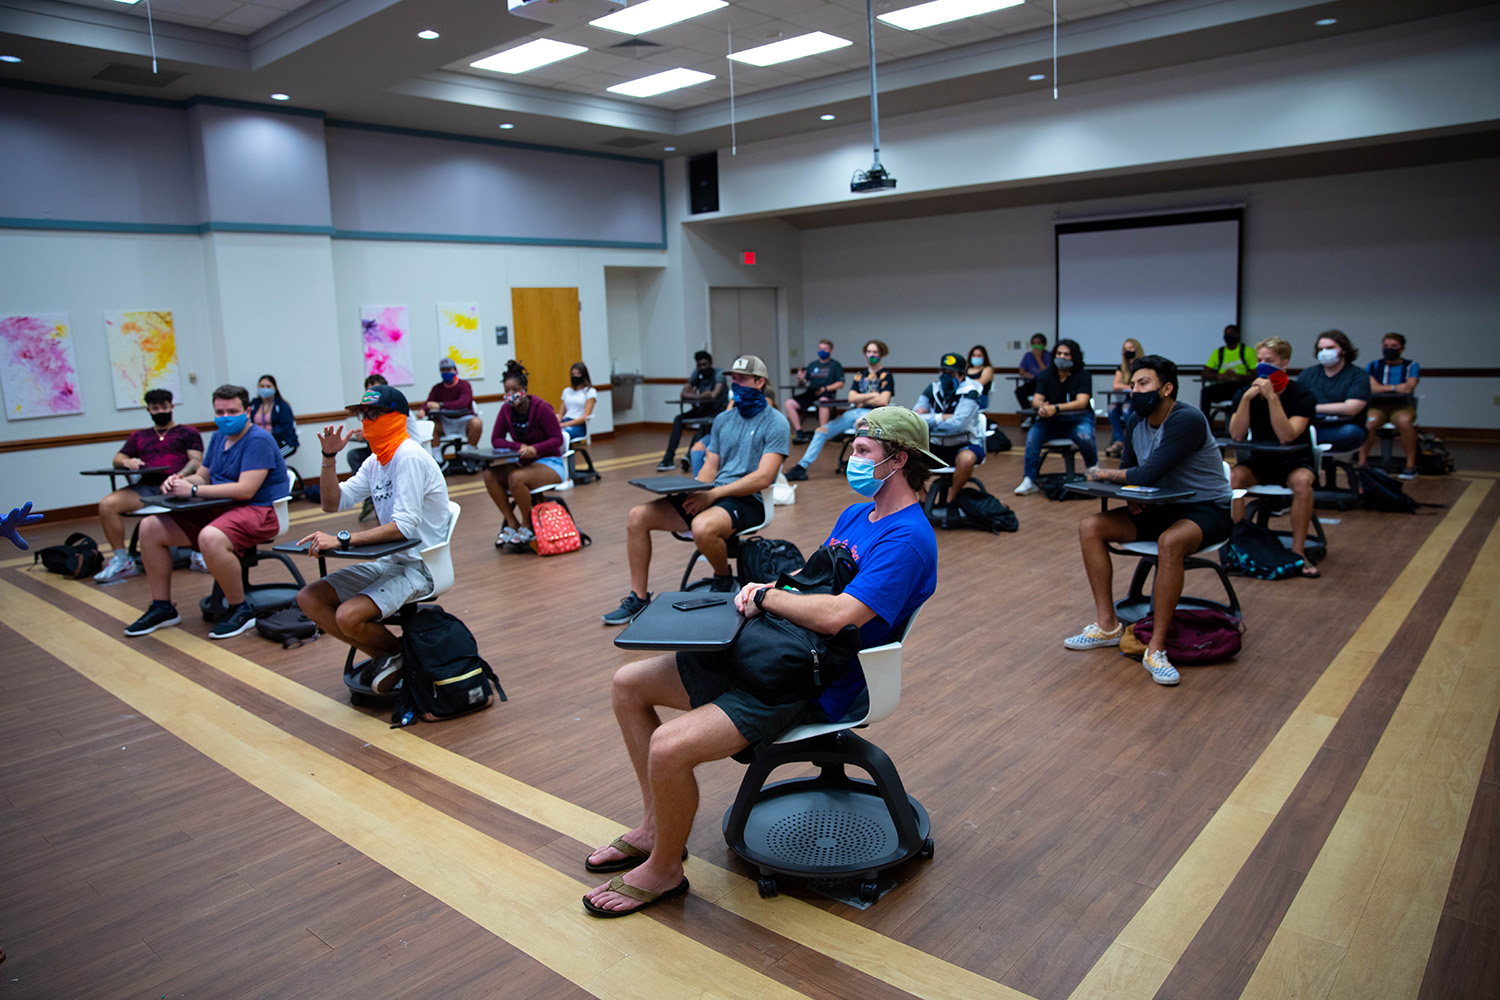 A class spaced out in S-29 during the first day of classes at Santa Fe College on Aug. 24, 2020 (Matt Stamey/Santa Fe College ) NO RELEASES